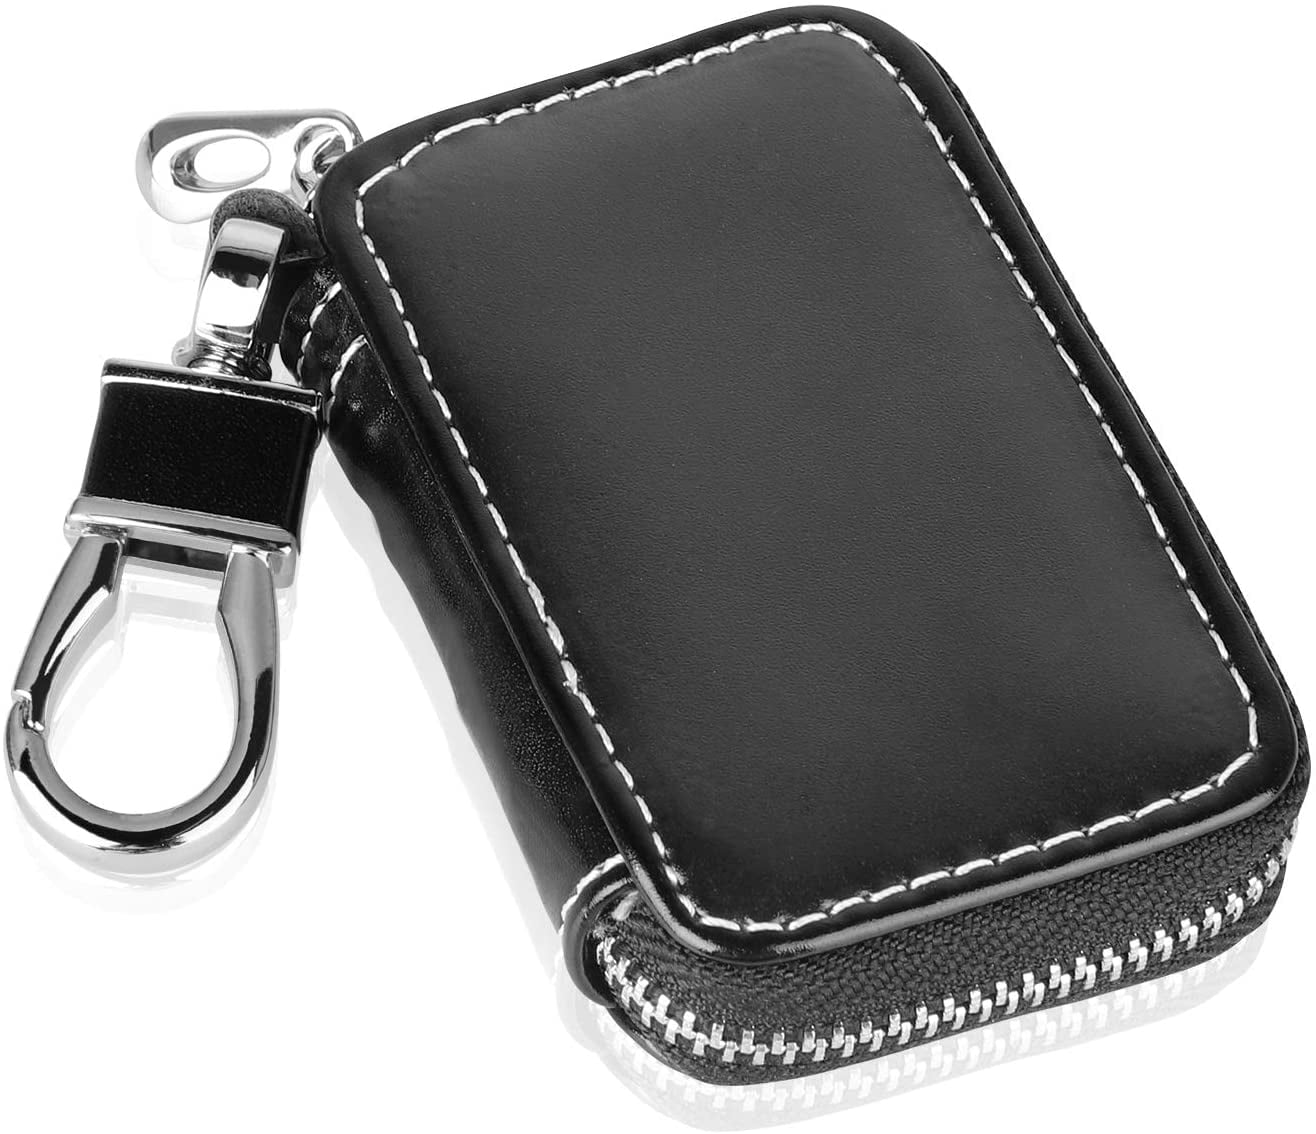 VILLSION Genuine Leather Car Key Case Holder with Stainless Steel Hook Car Remote Control Key Case Metal Zipper 